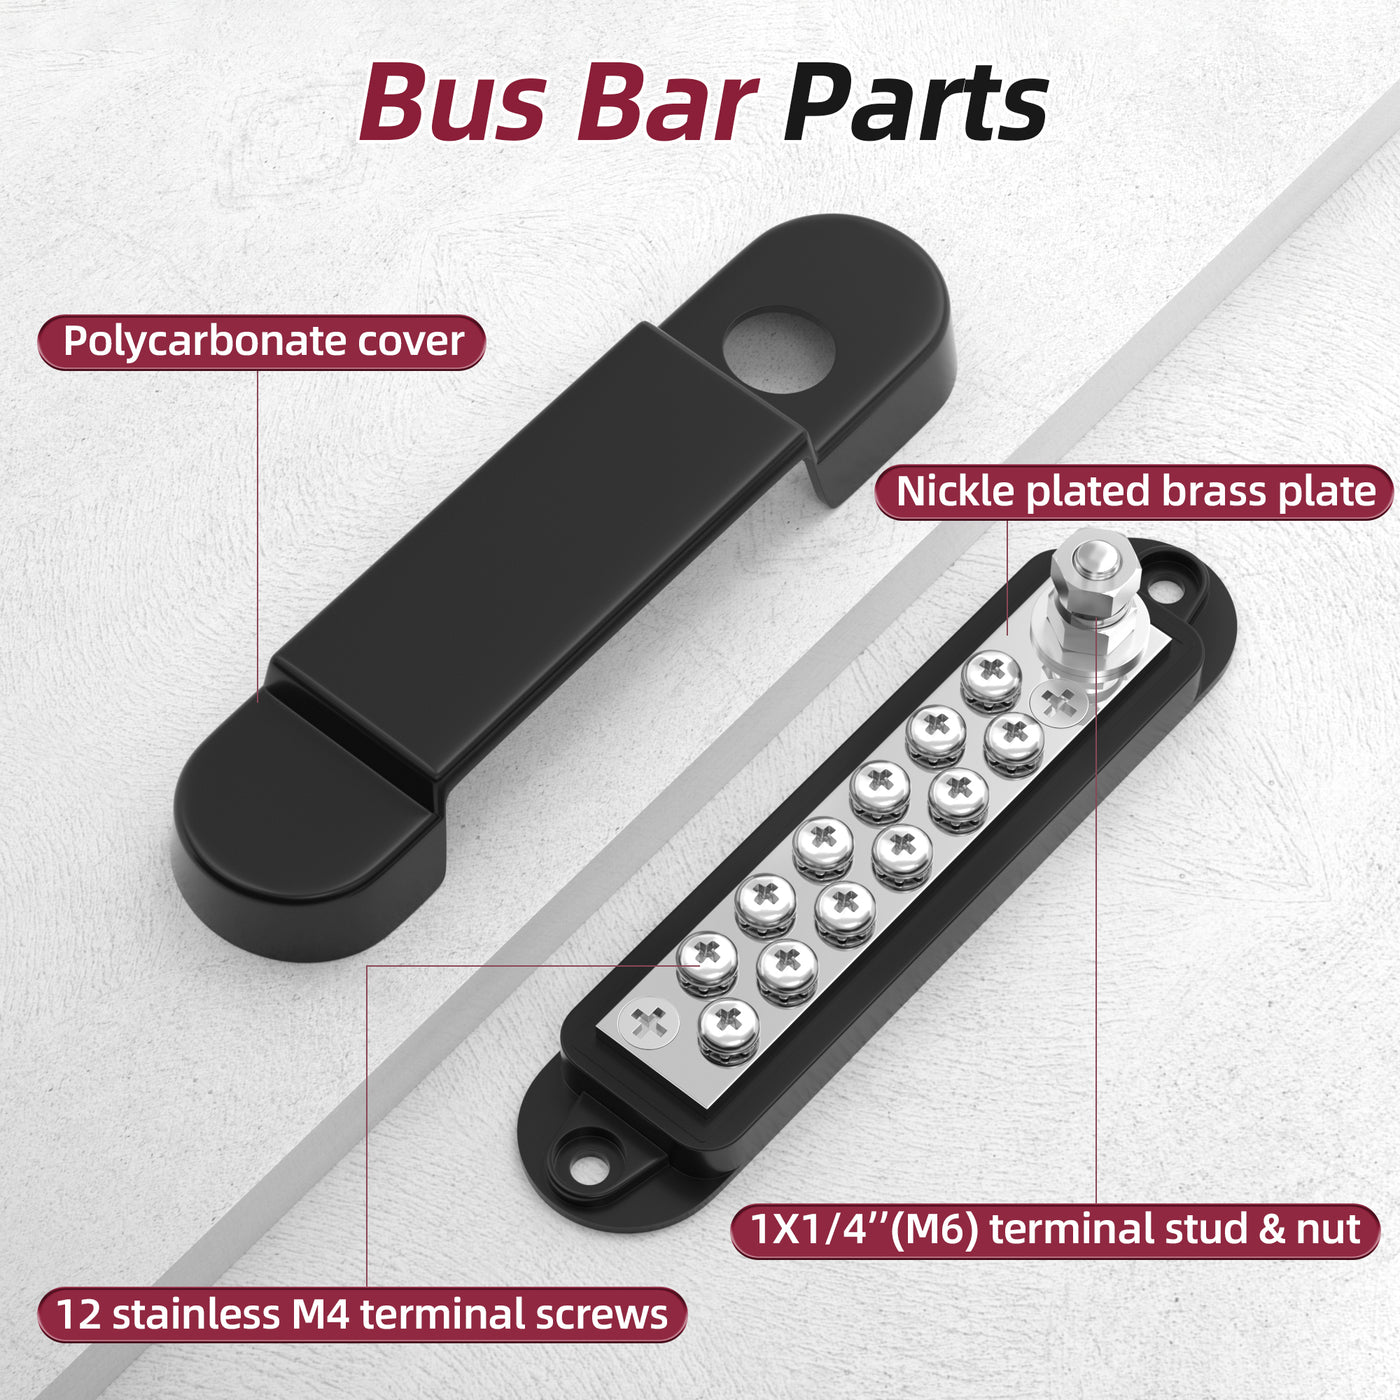 BB150-T1M6S12-RB 48VDC 150A M6 Stud Marine Bus Bar Features